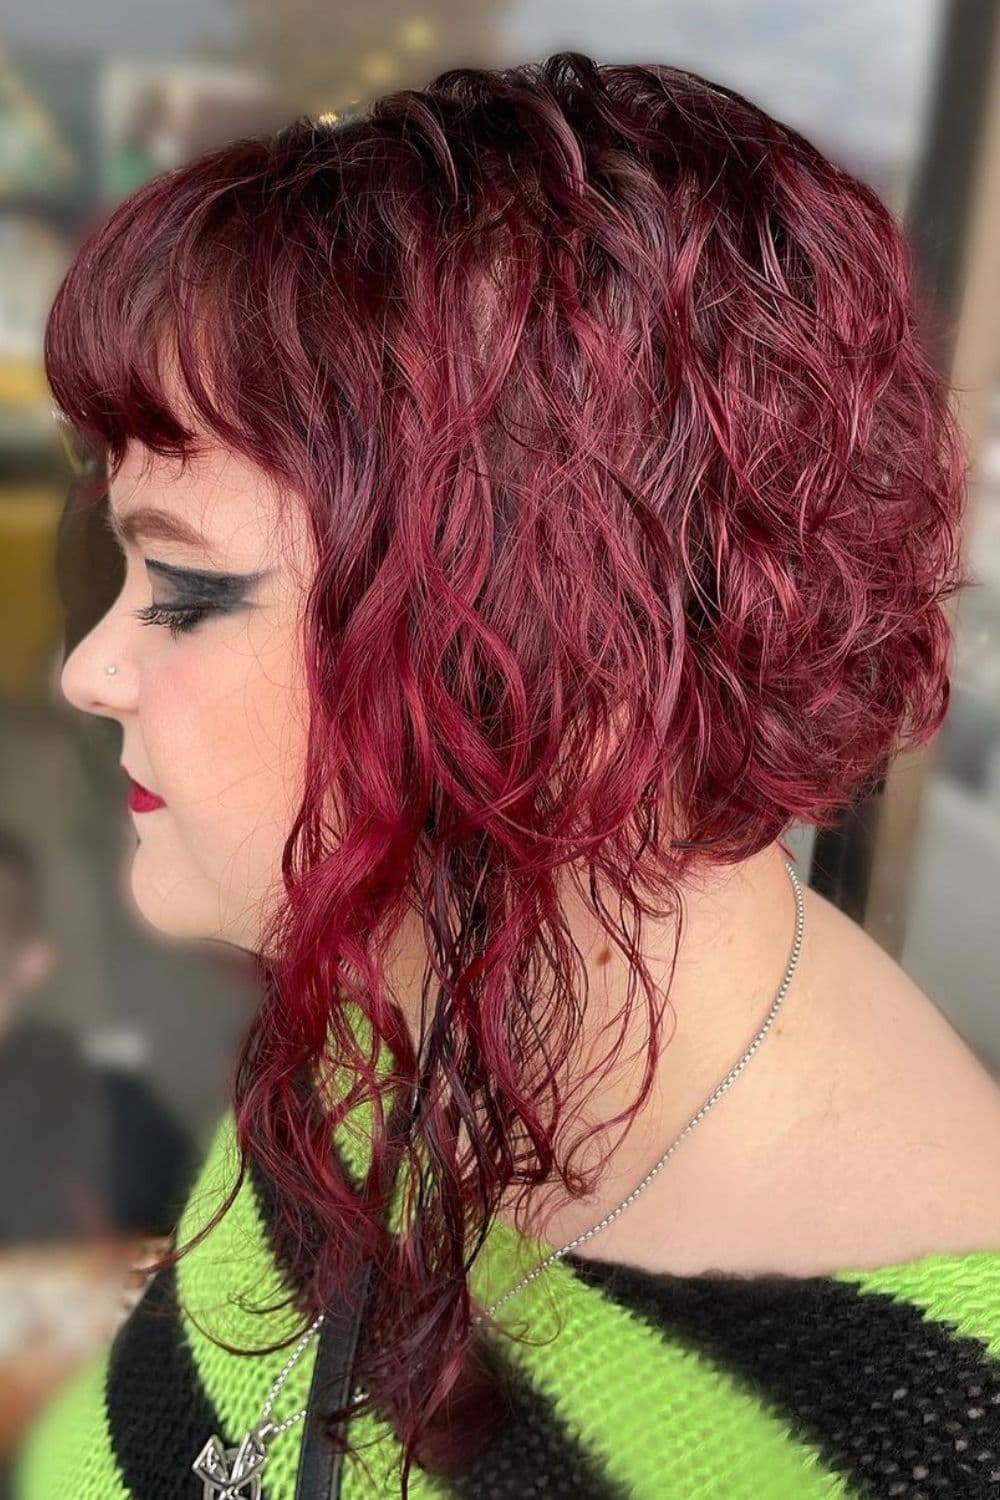 A woman with a red curly inverse bob with baby bangs.